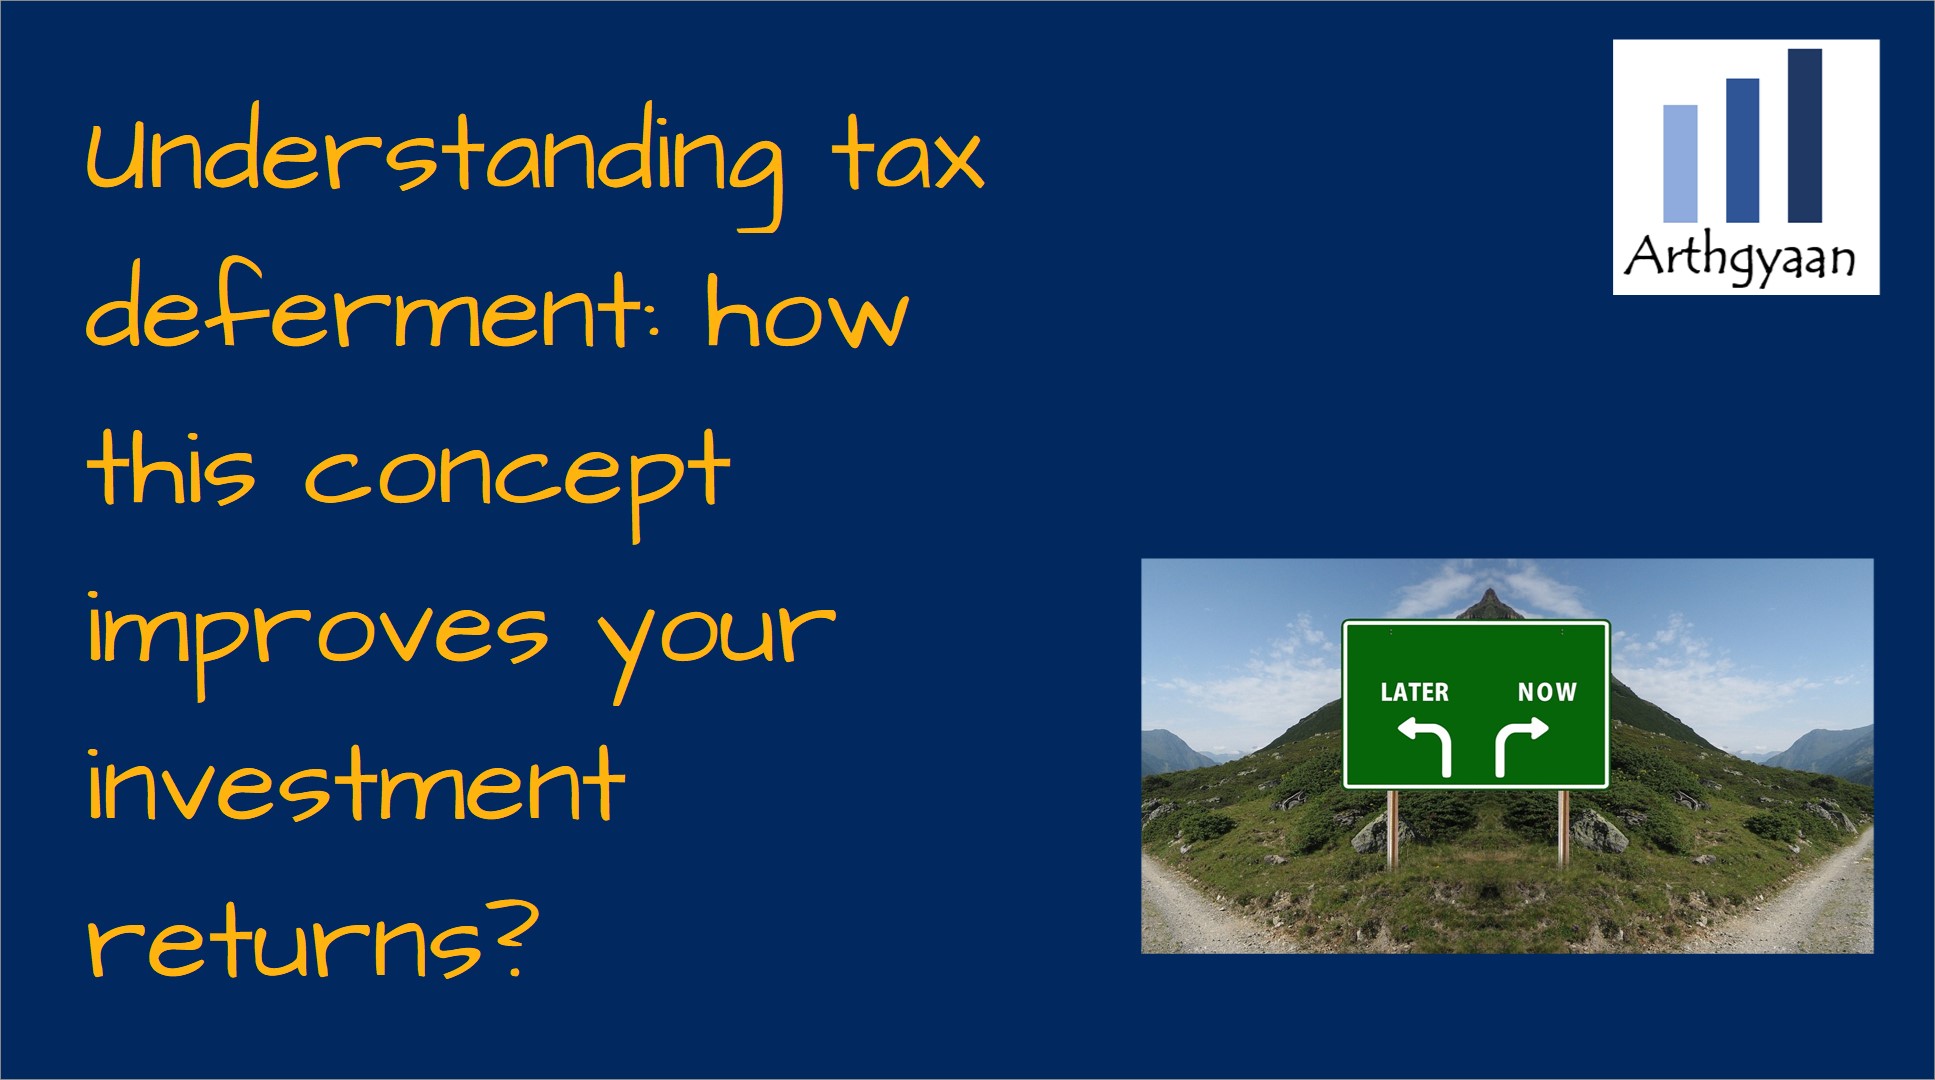 Understanding tax deferment: how this concept improves your investment returns?